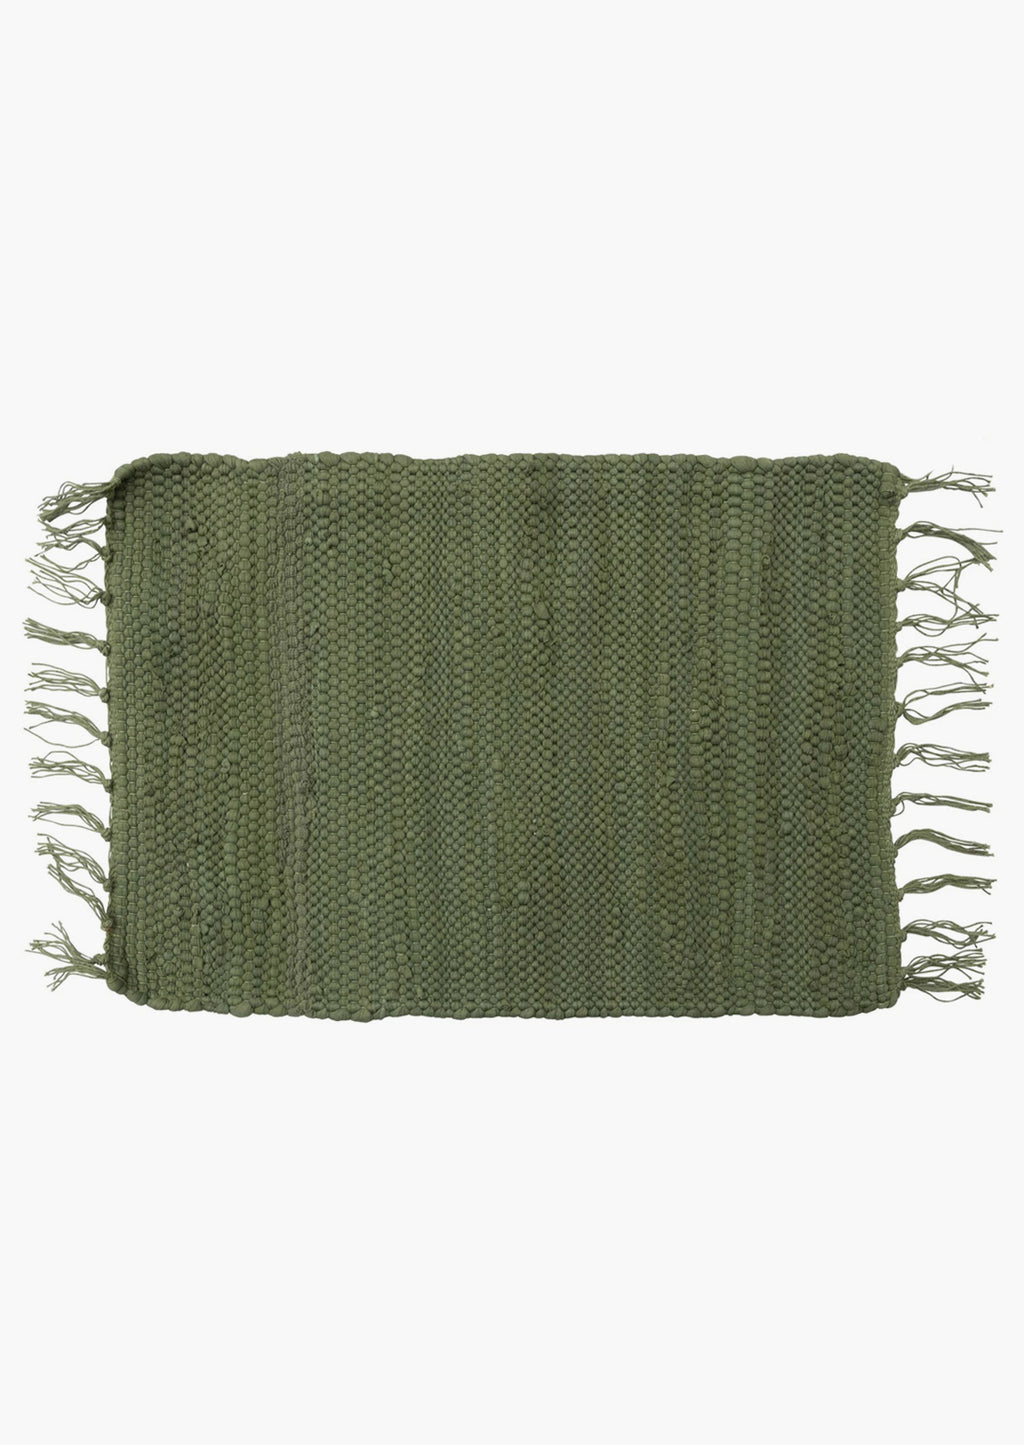 1: An olive green chindi weave placemat.